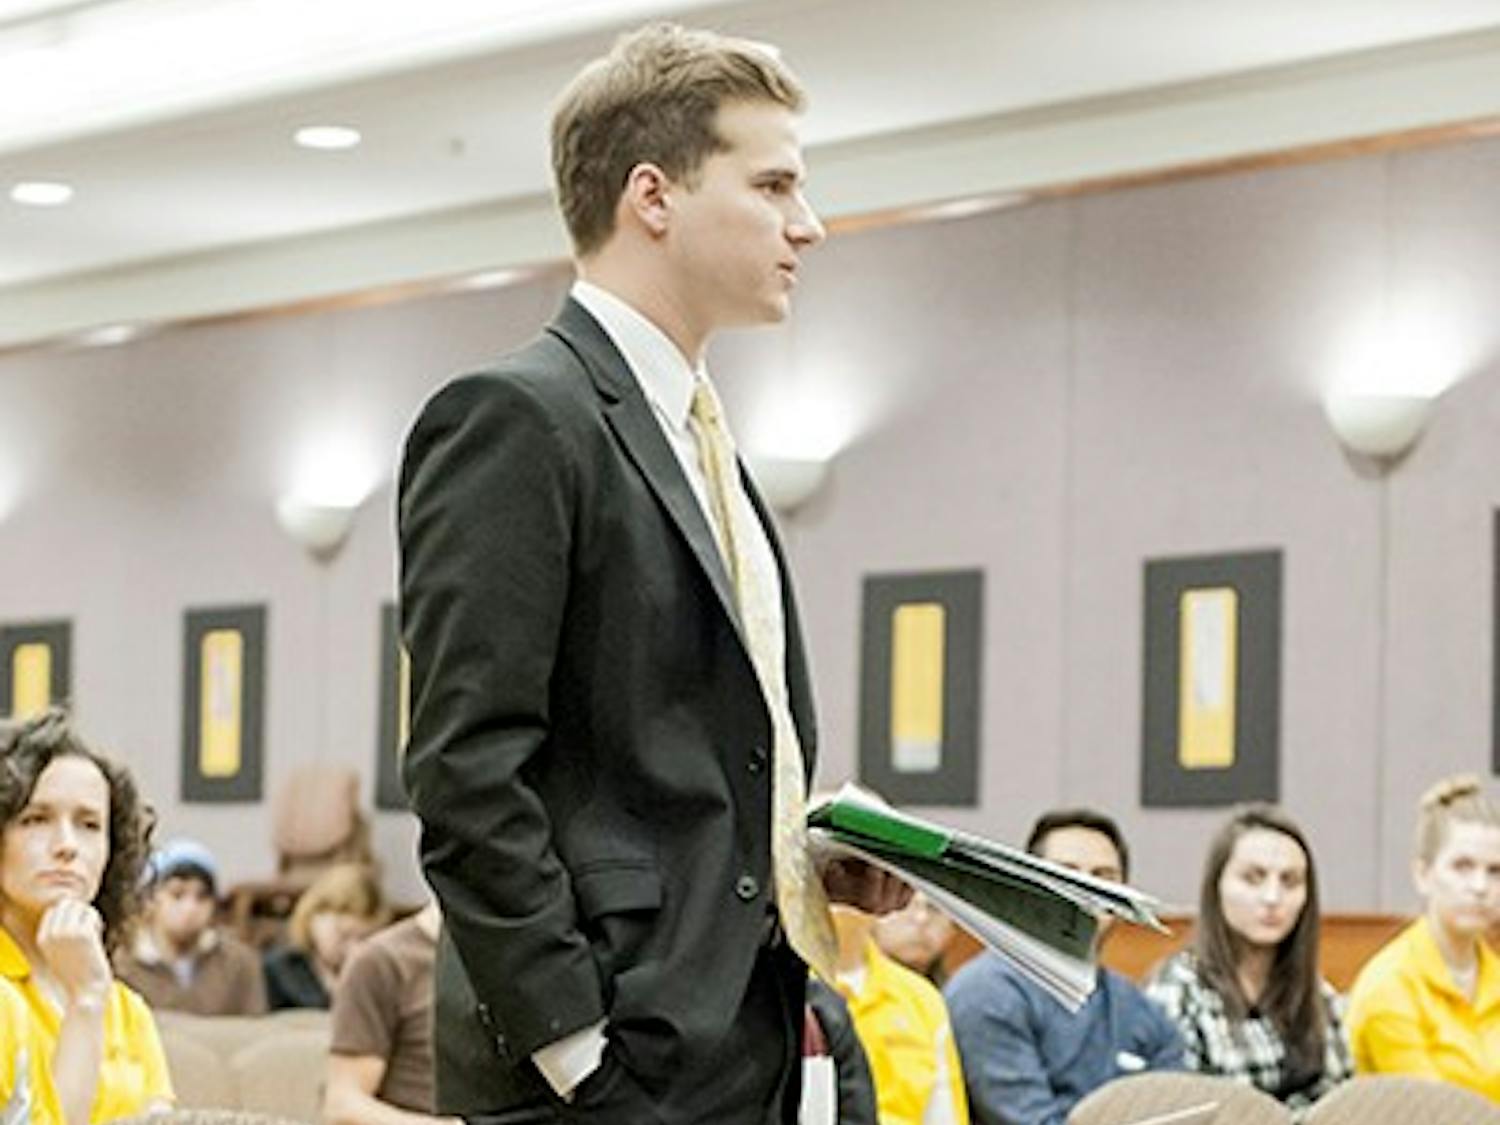 USG Senate President Will Smith speaks during a hearing before the USG Supreme Court in which former senator Isabelle Murray appealed her impeachment from the Senate. The court rejected Murray’s appeal 4-0. (Photo by Ben Moffat)